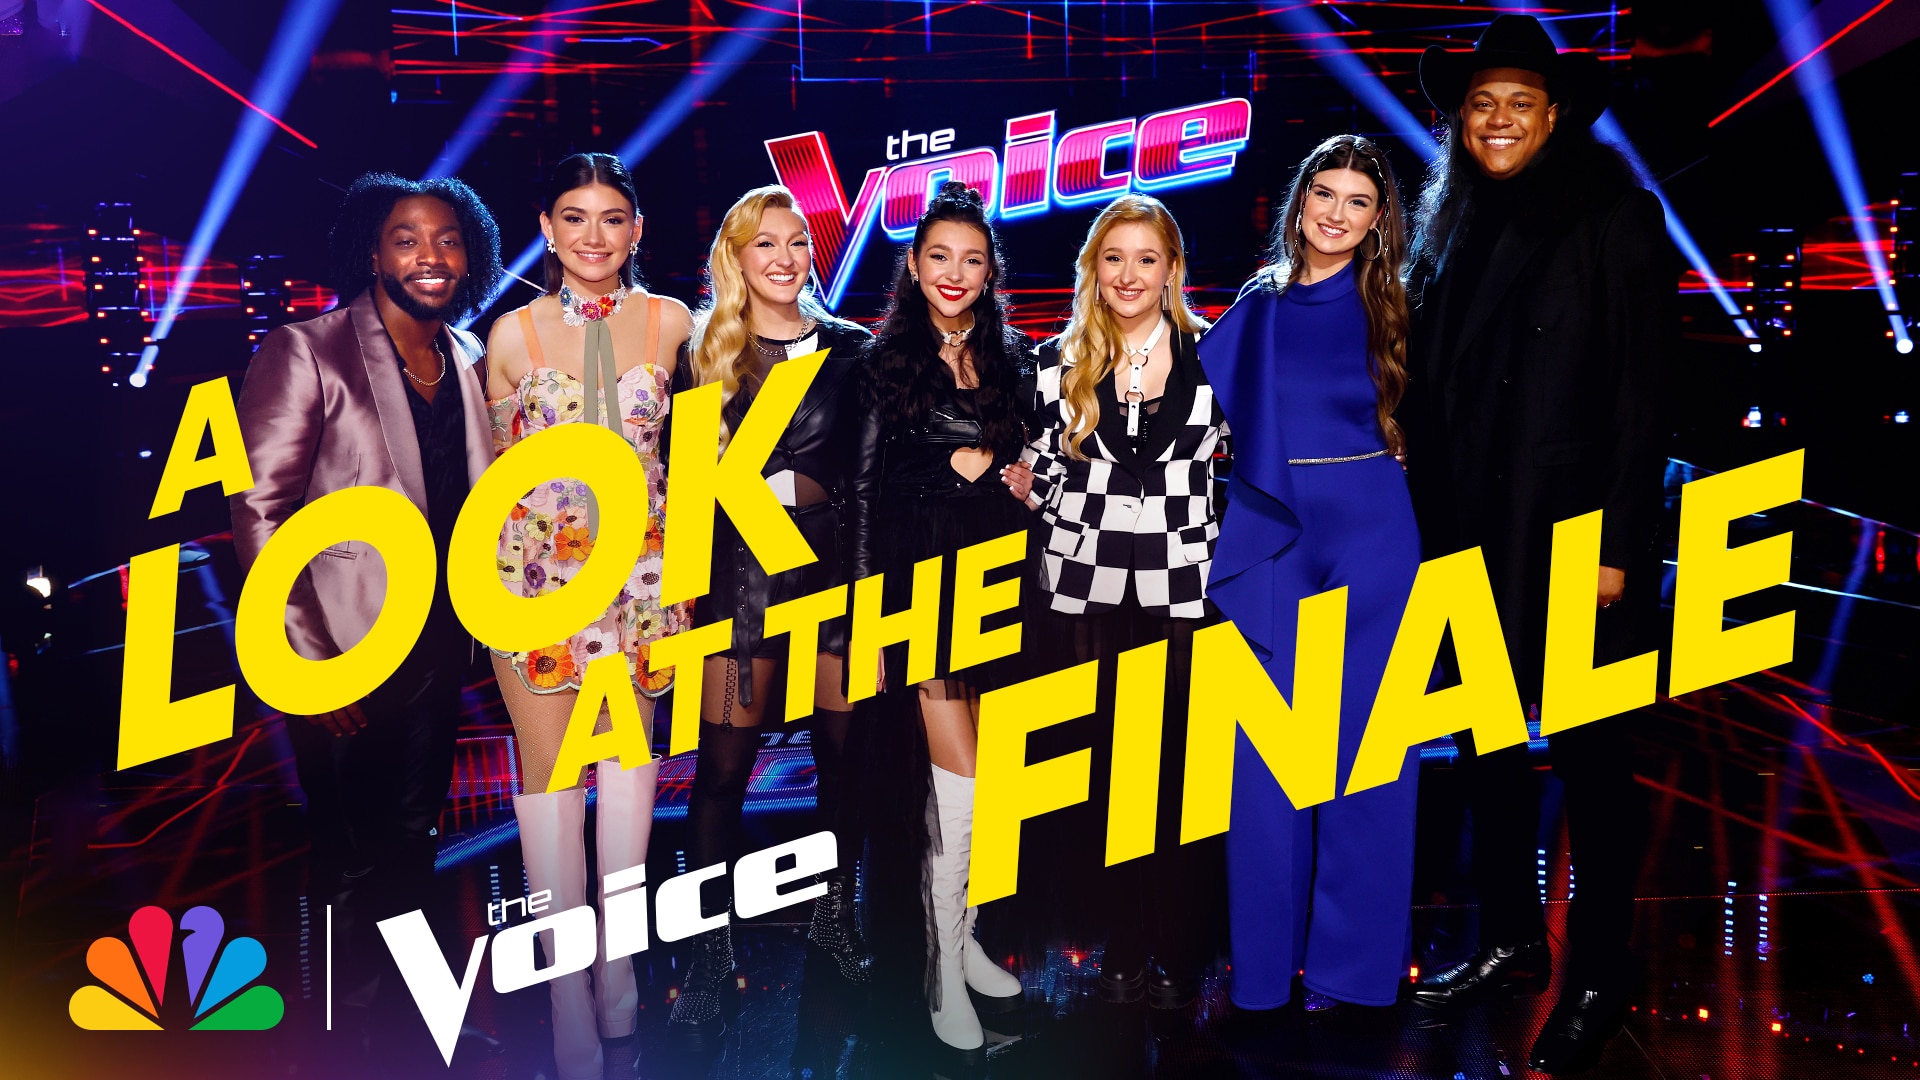 Watch The Voice Web Exclusive The Coaches and Top 5 Artists Give a